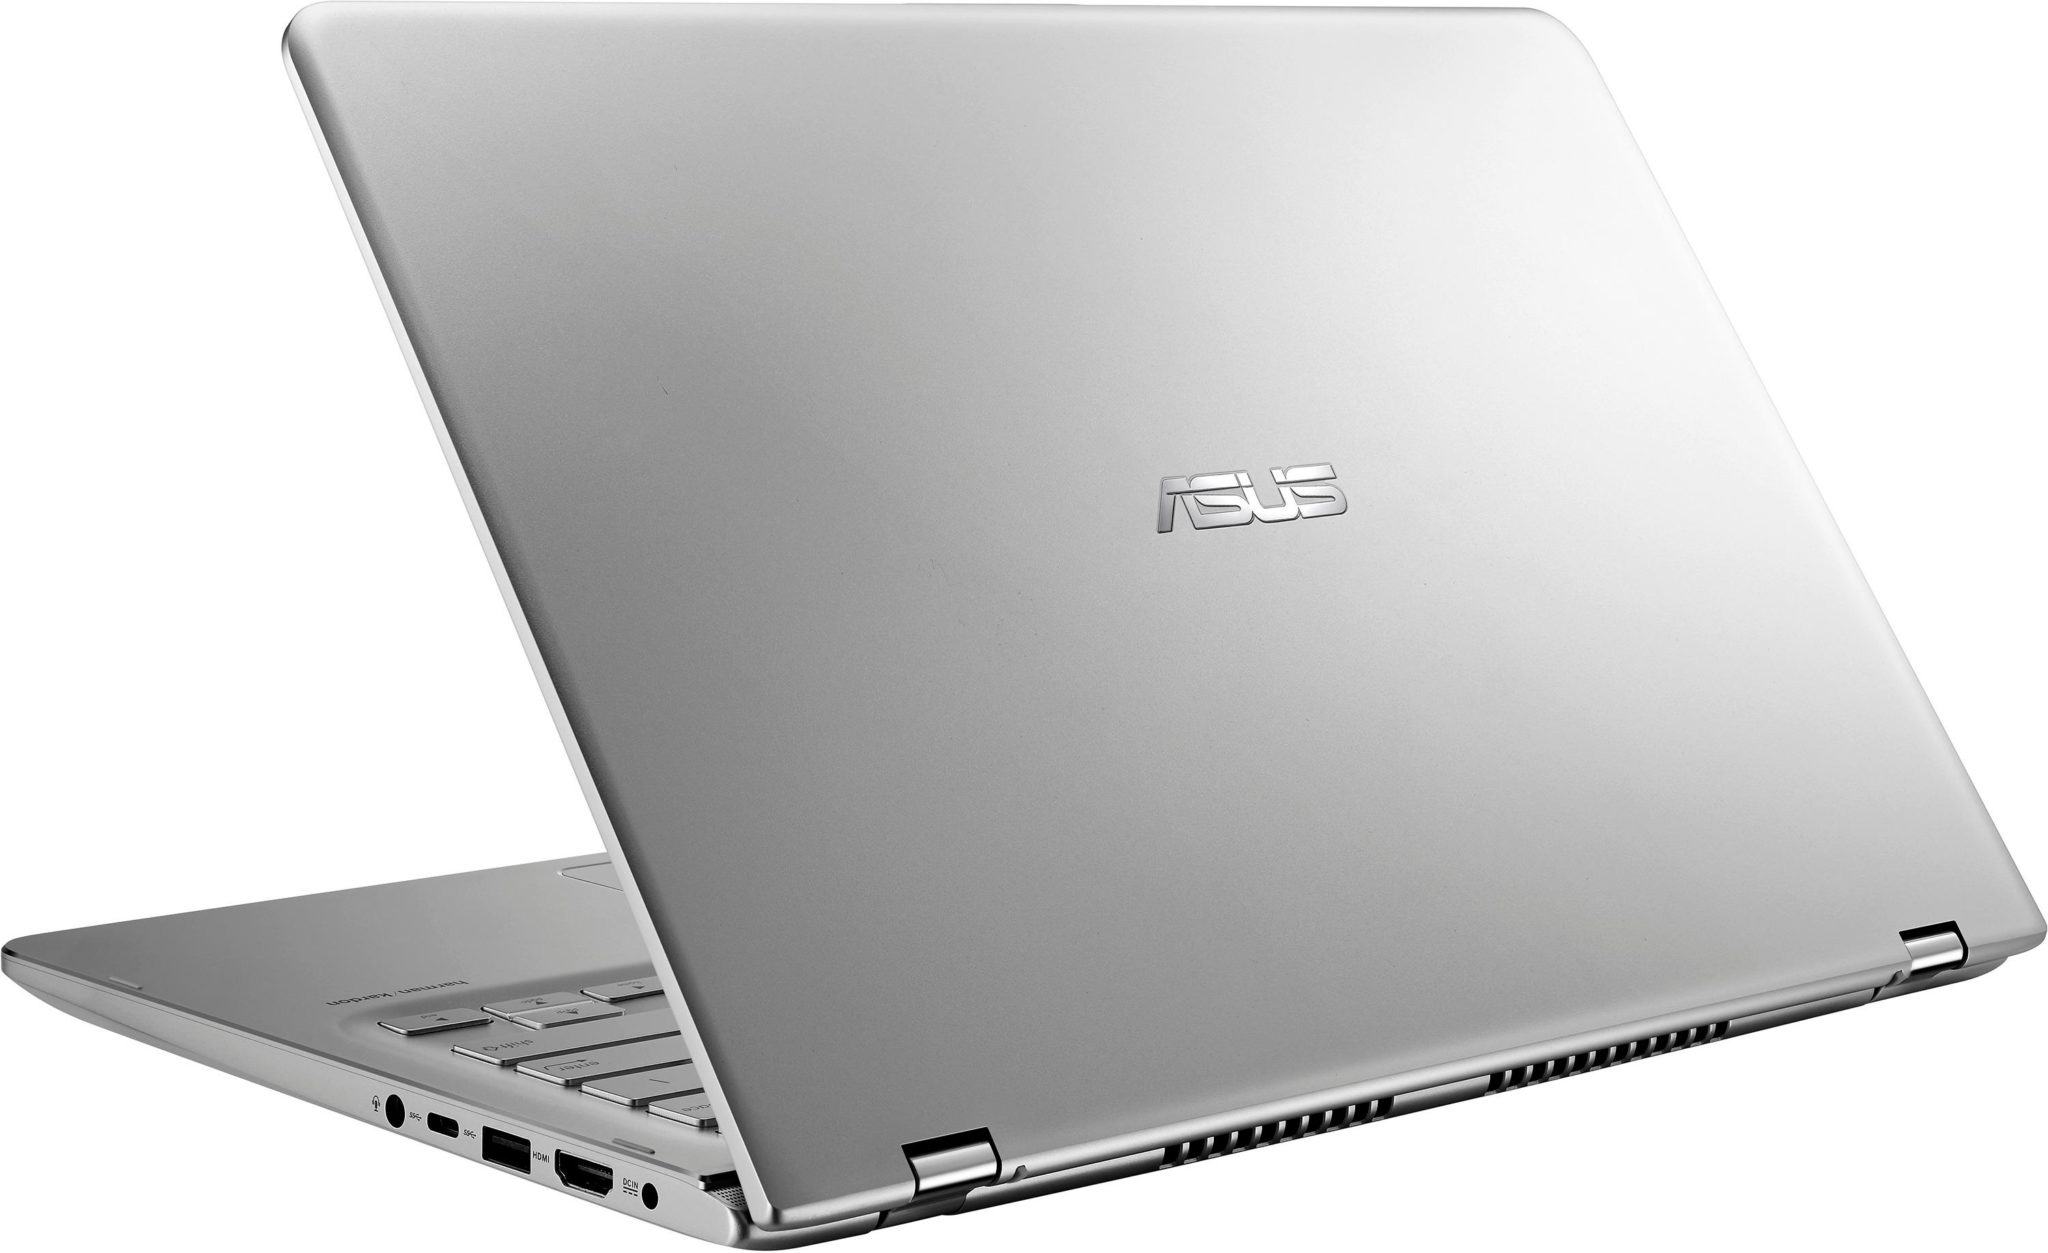 Asus Laptop Data Recovery